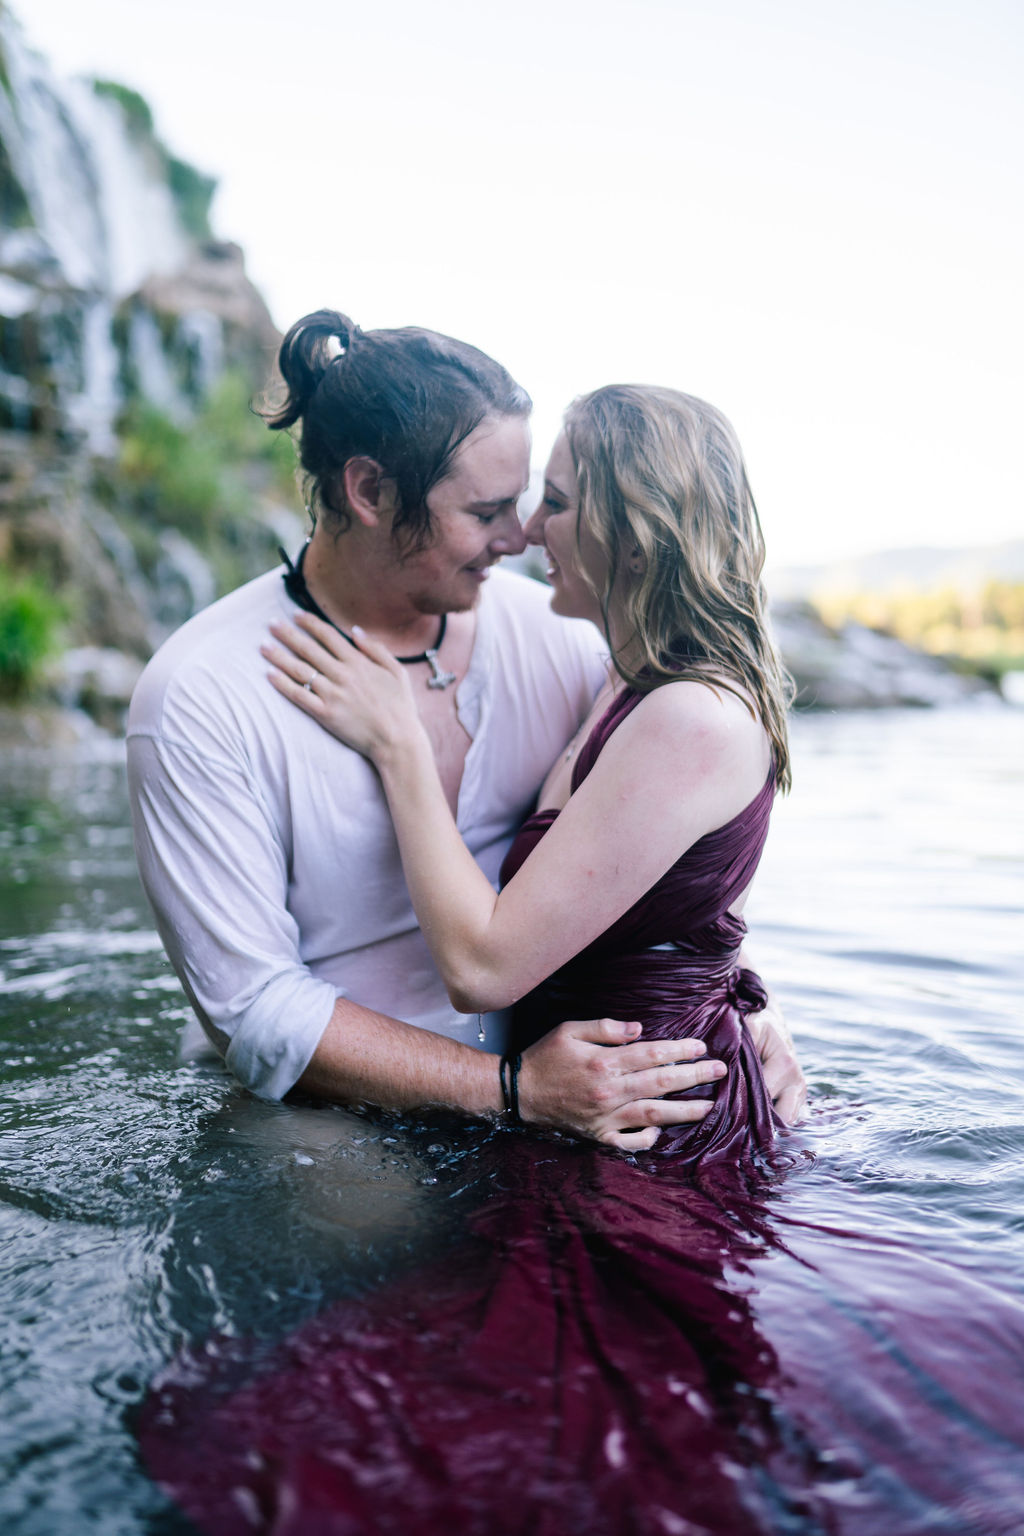 waterfall engagement session in TEnnessee with man and woman sitting in a pond together holding each other while completely soaked